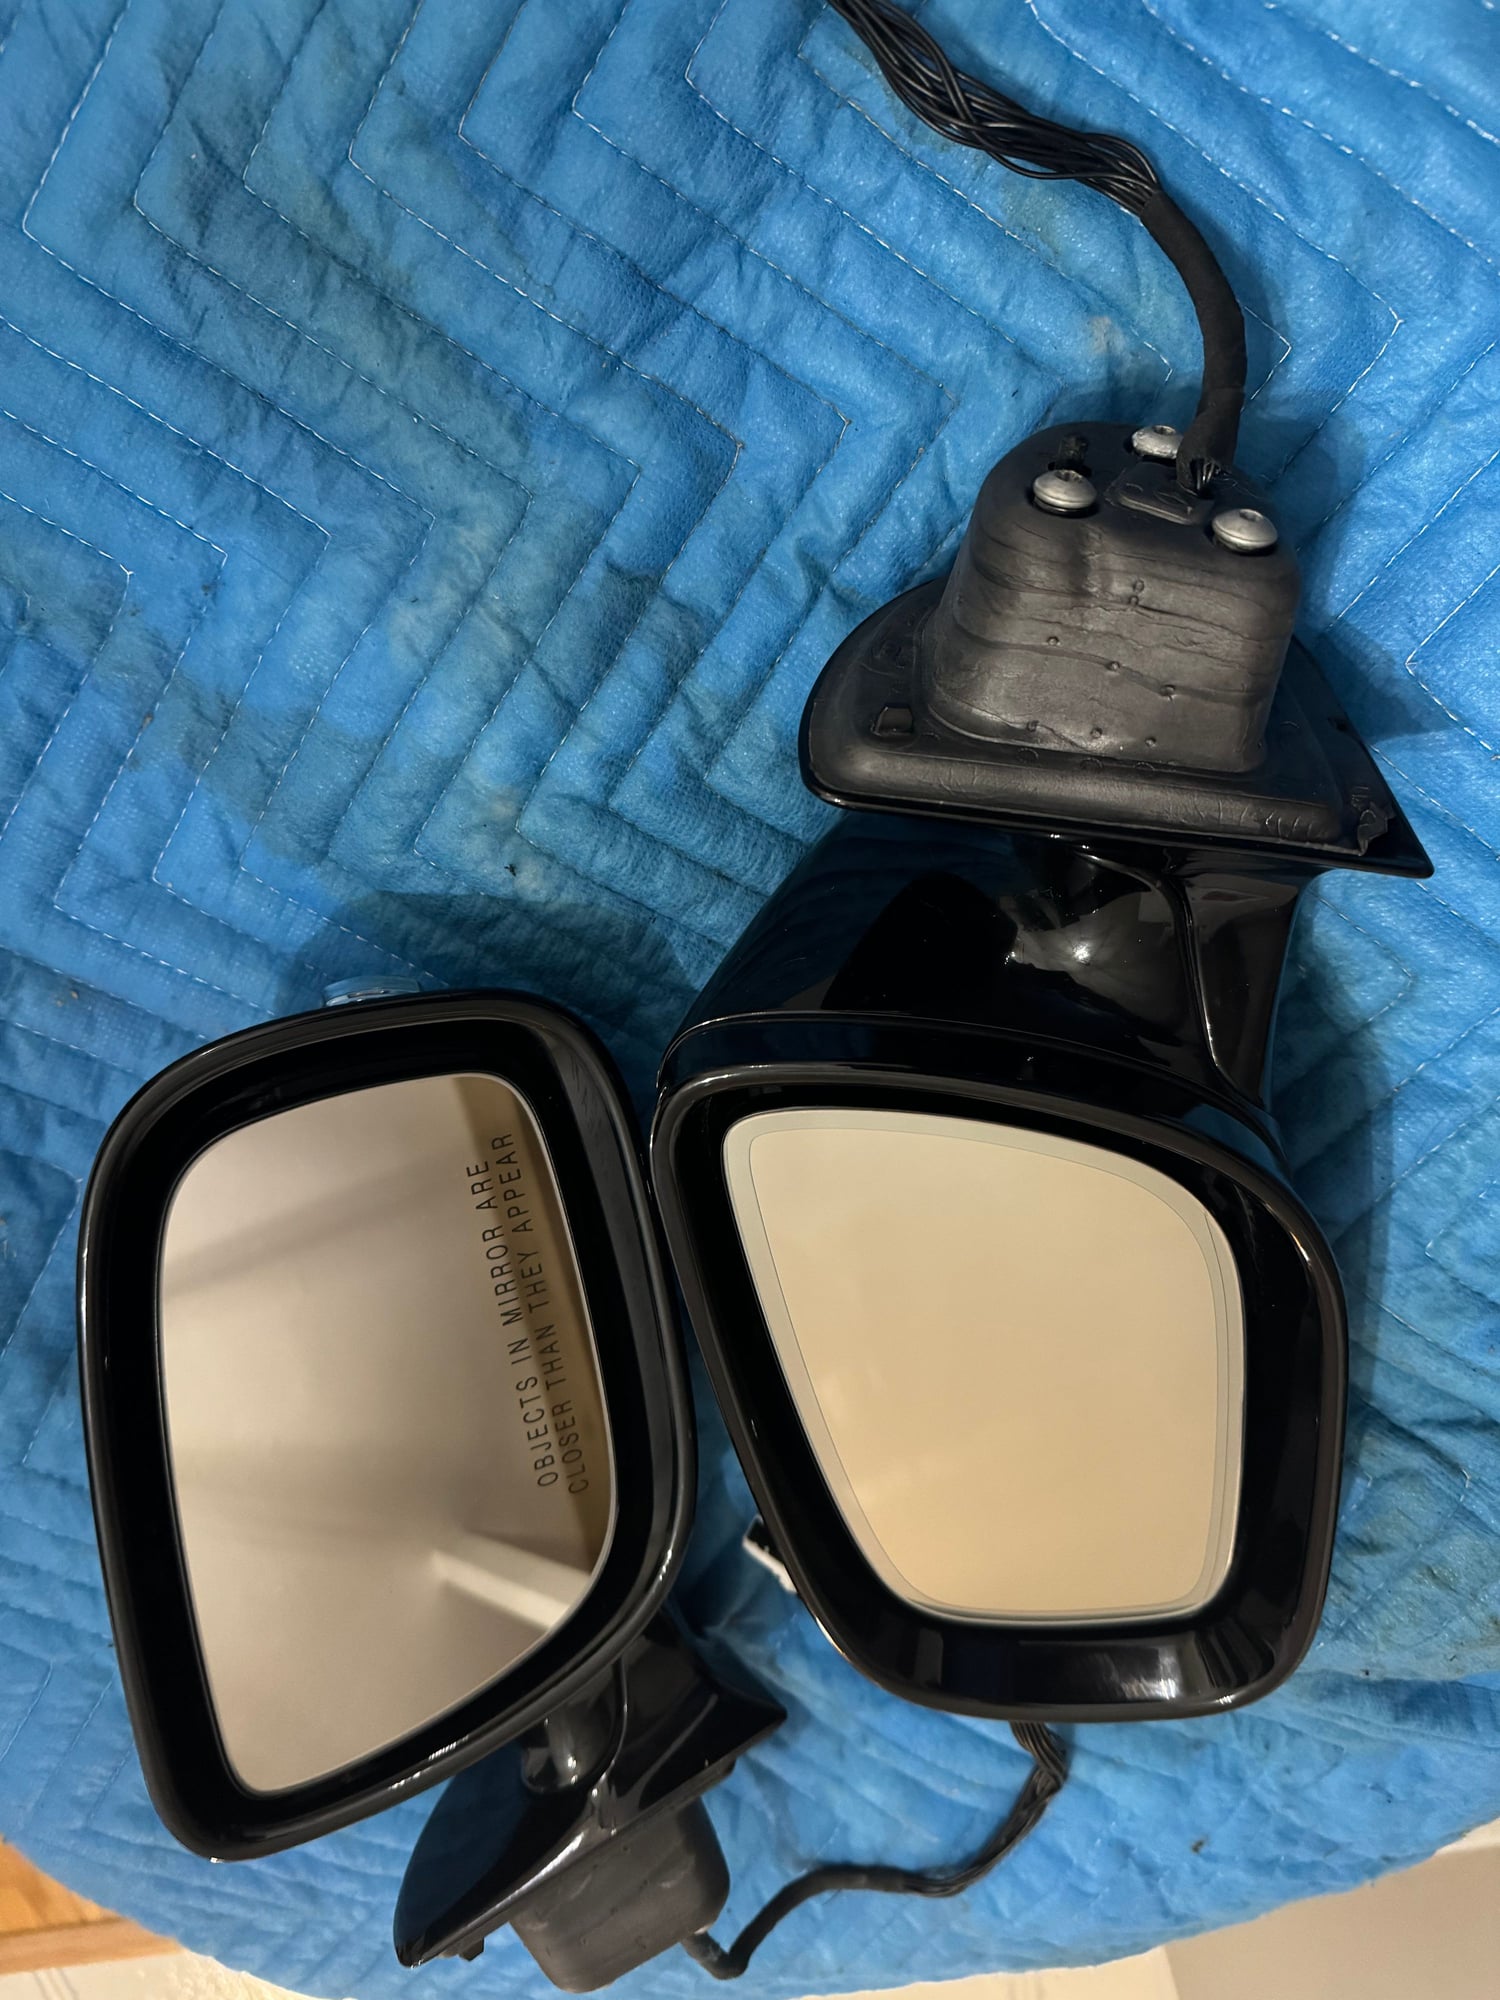 2005 Mercedes-Benz E55 AMG - Pair of 07-09 Mercedes W211 E63 E550 Right/Left Side View Door Mirrors - Accessories - $200 - Cleveland, OH 44116, United States